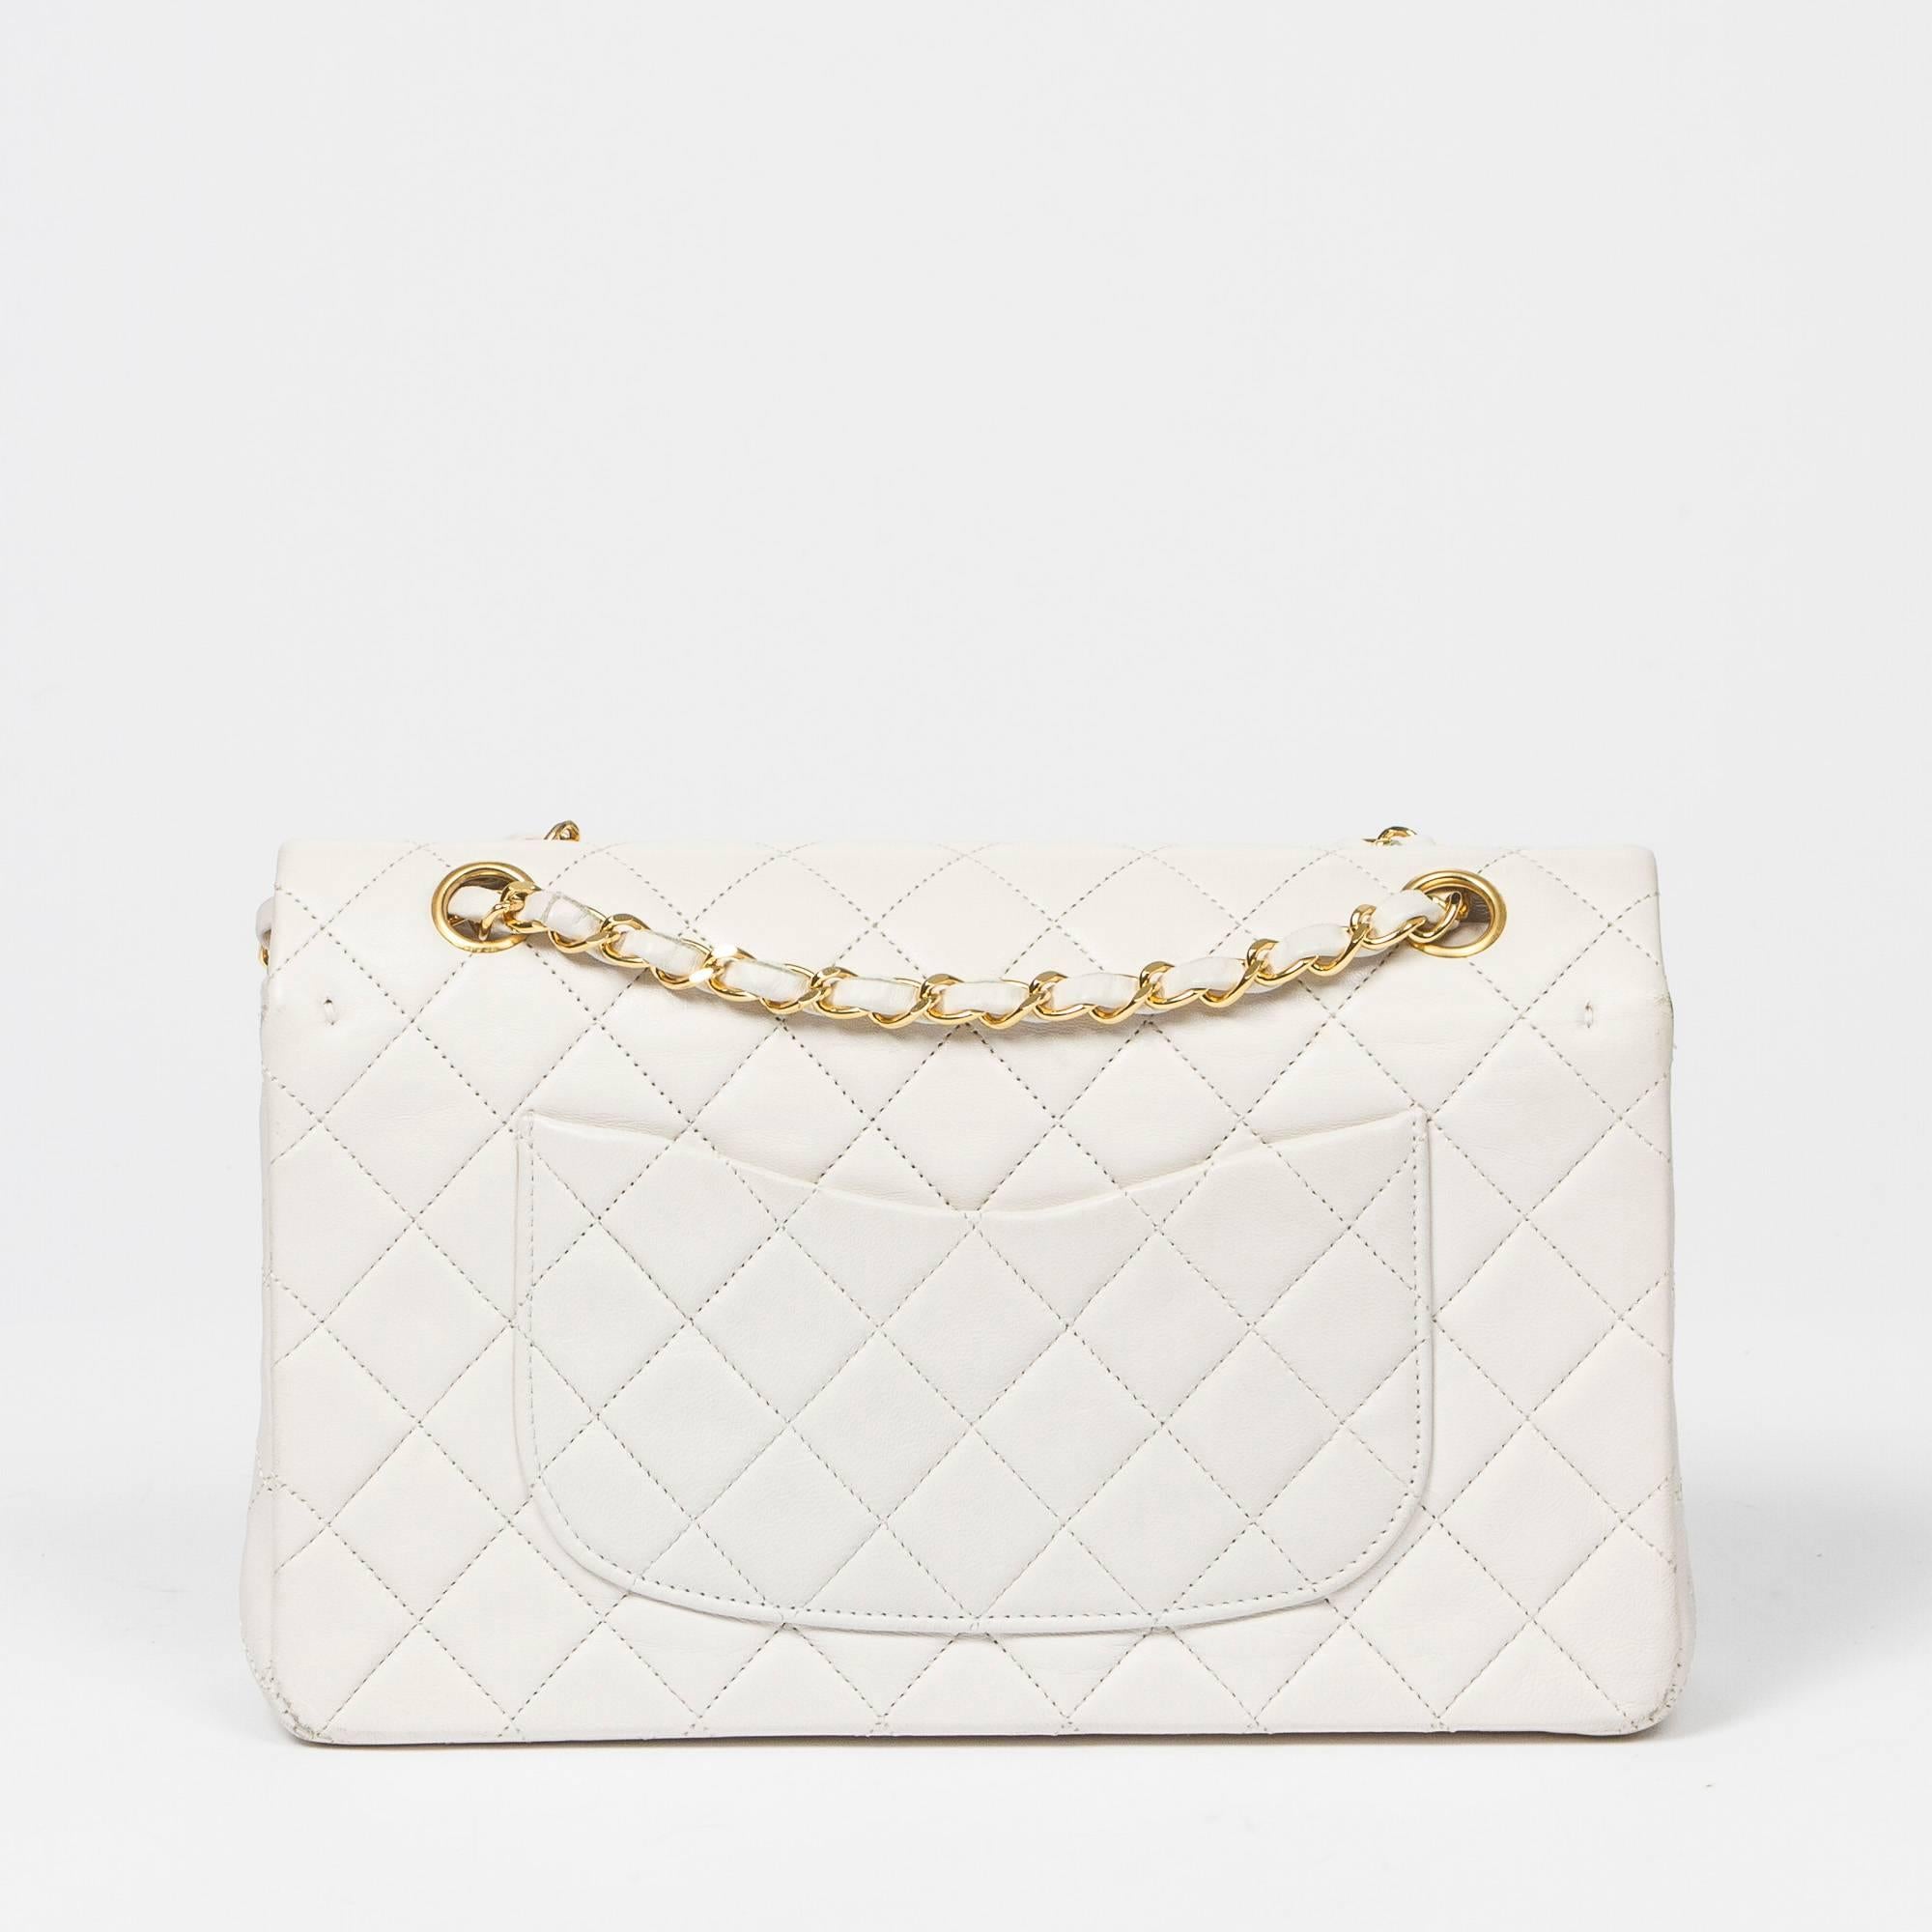 Classic Double Flap 26 in white quilted lambskin, double chain strap interlaced with leather, signature turnlock closure, gold tone hardware. Back slip pocket. White leather lined interior with 3 slip pockets. Gold tone heat stamps 